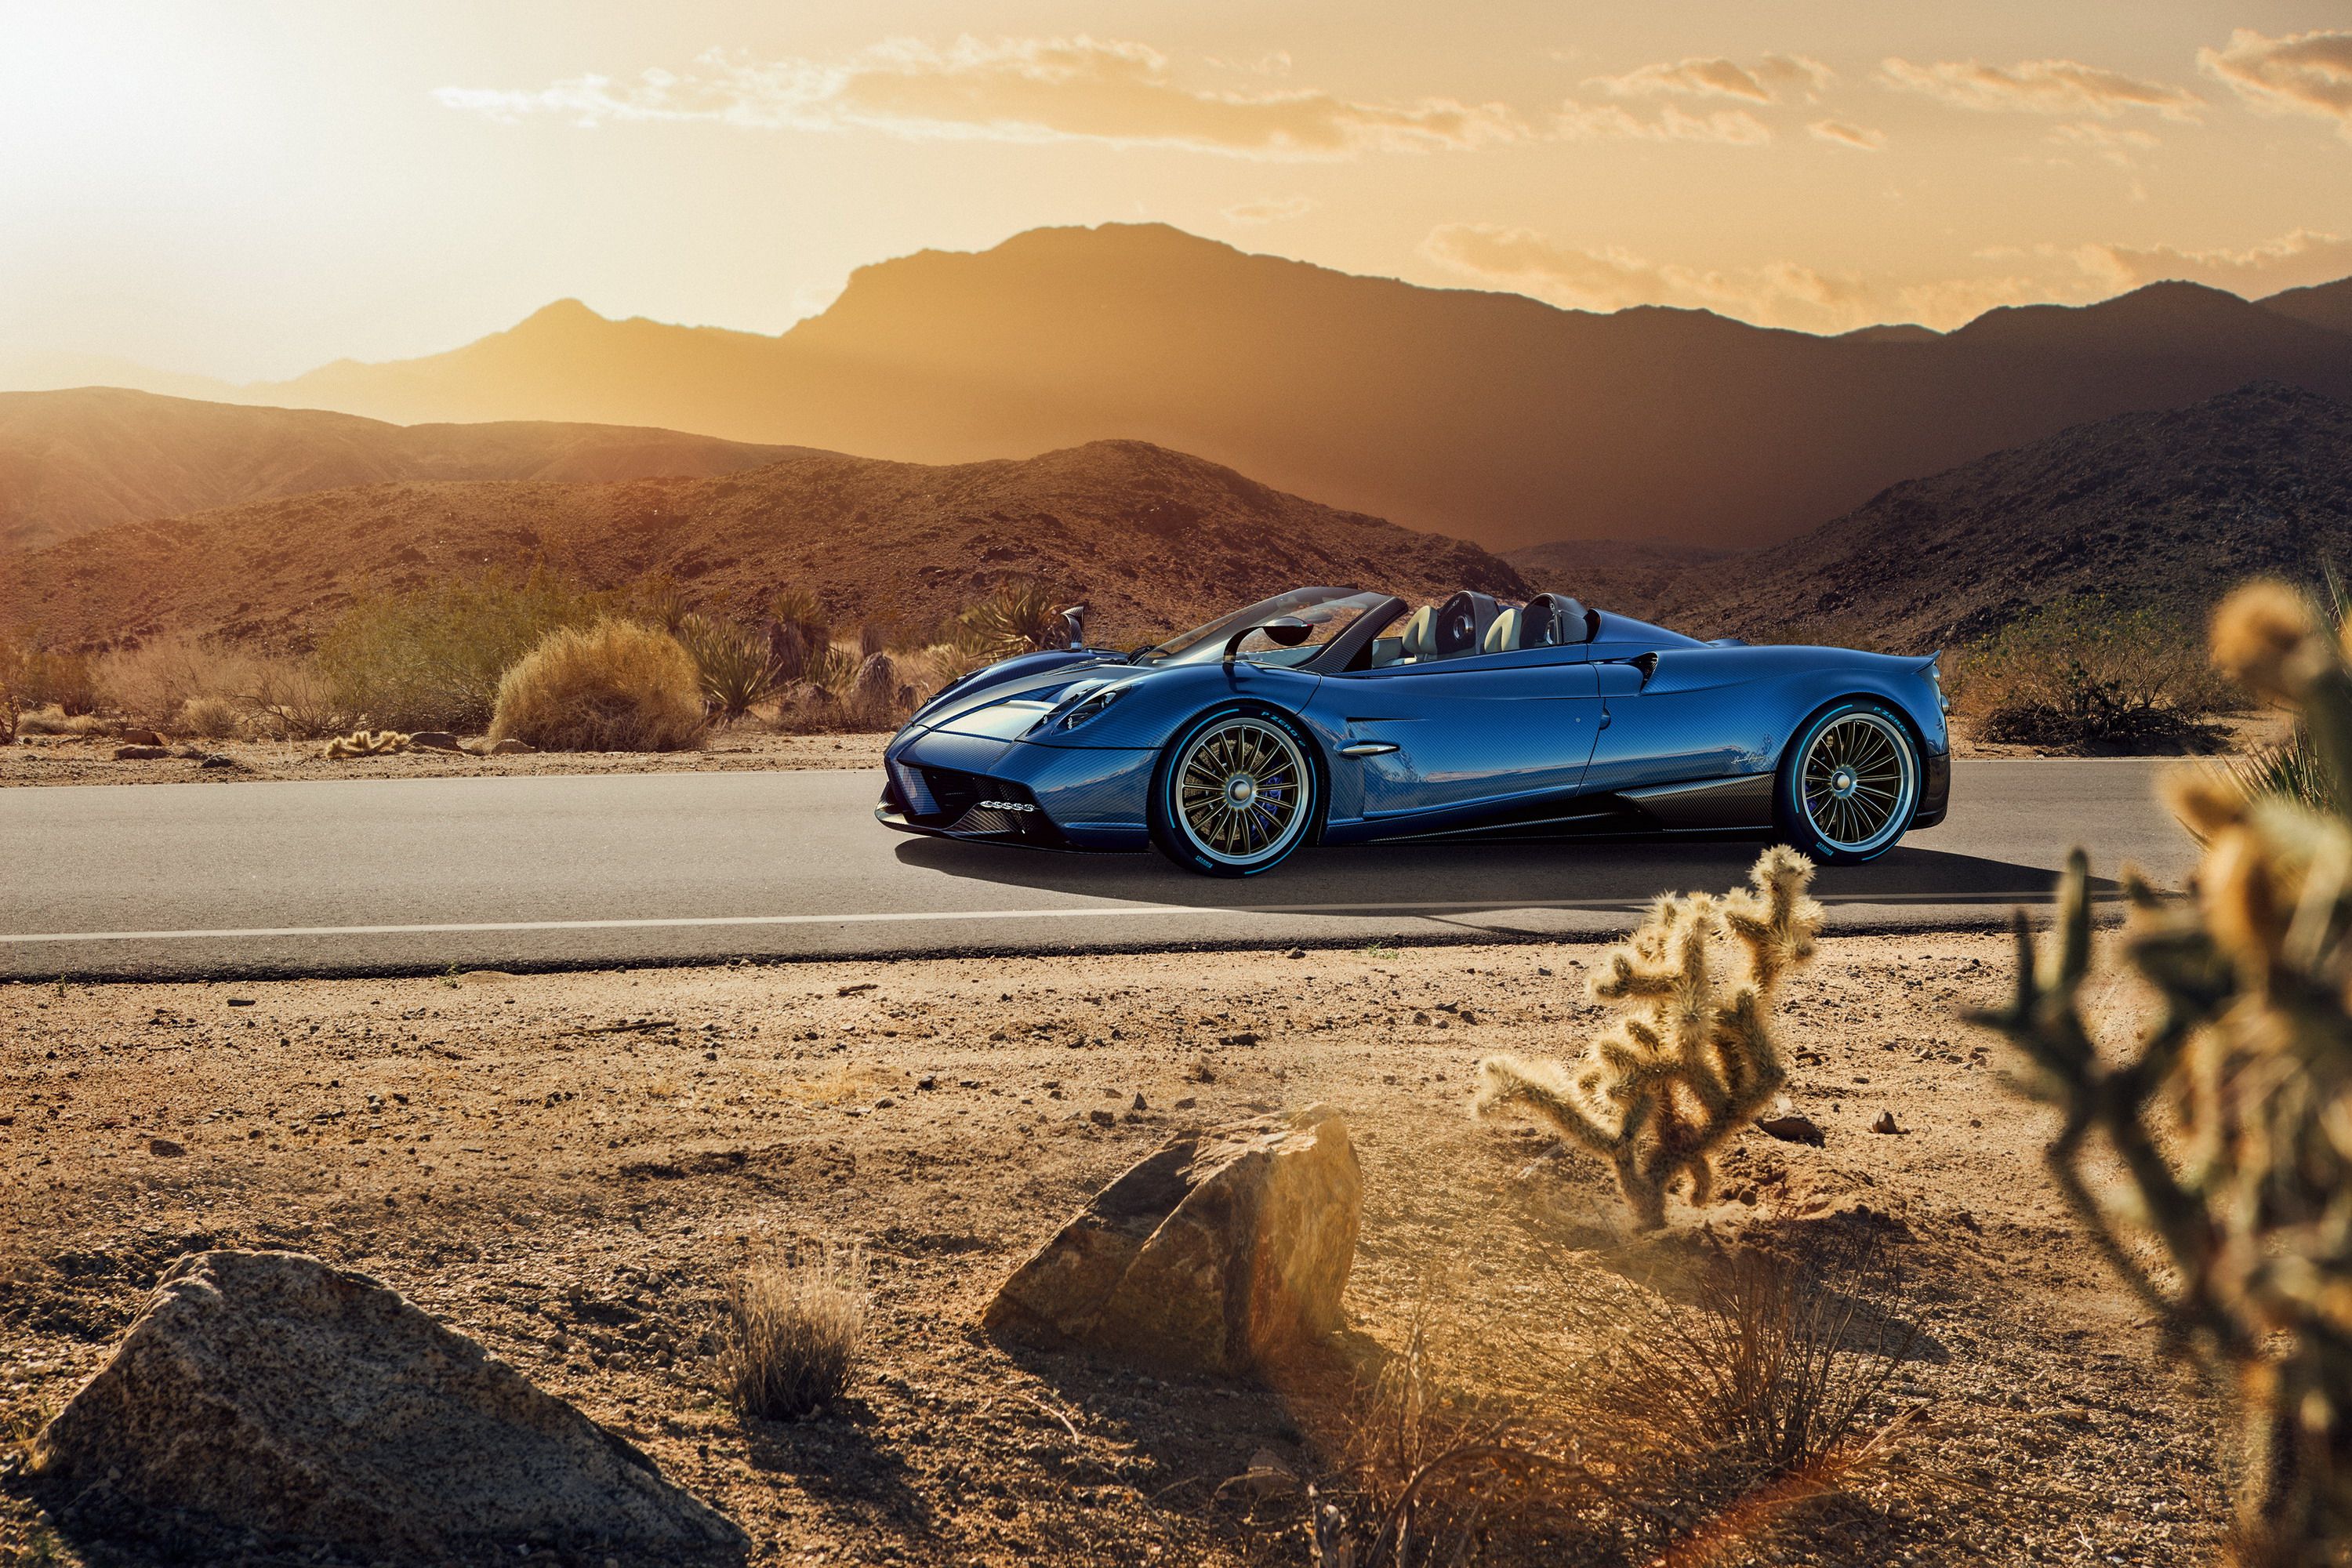 Wallpaper Of The Day: 2018 Pagani Huayra Roadster Picture, Photo